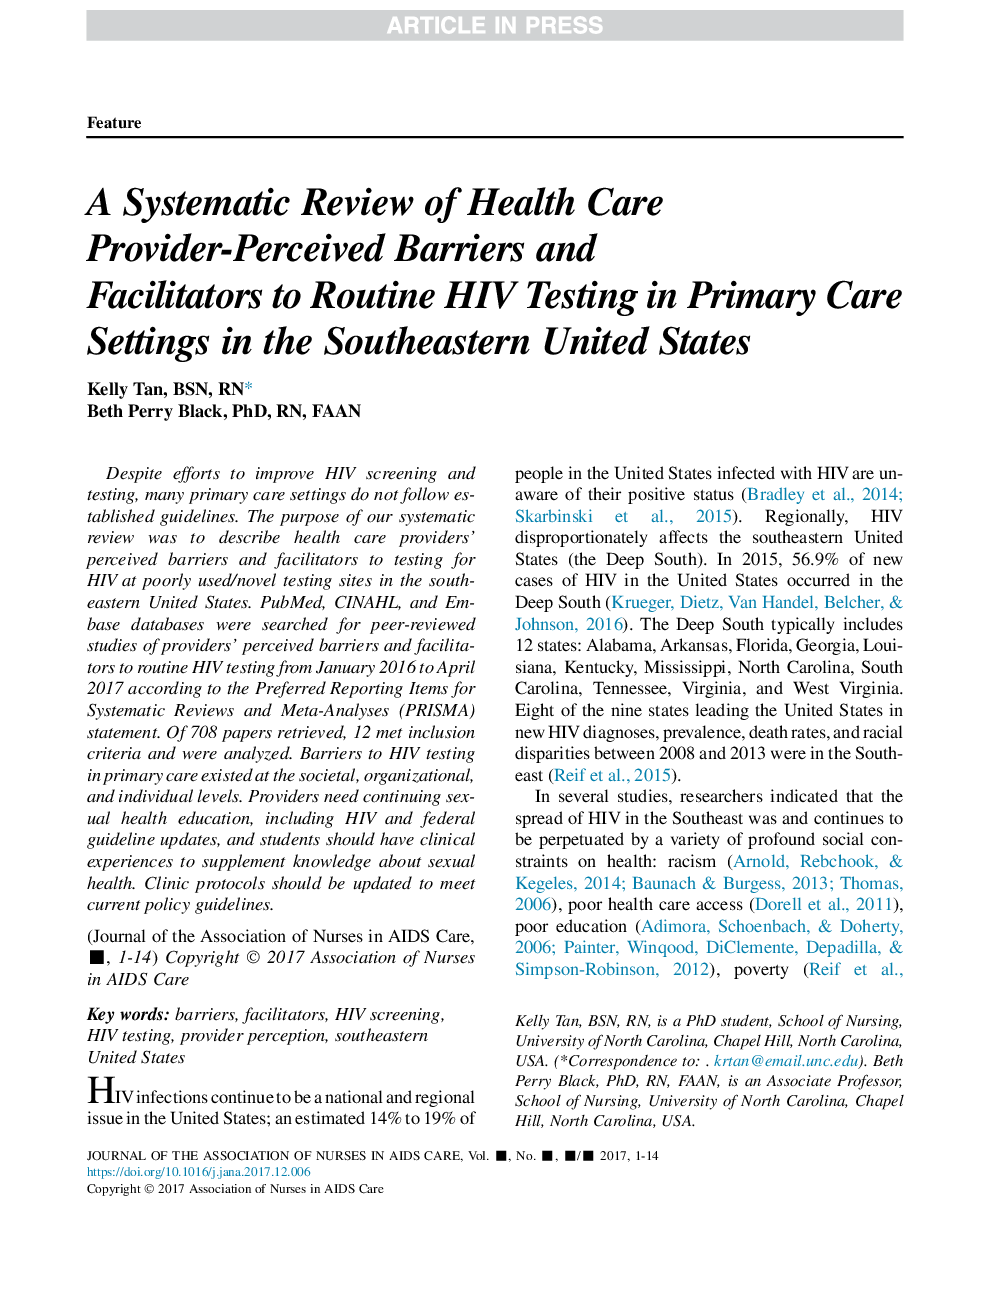 A Systematic Review of Health Care Provider-Perceived Barriers and Facilitators to Routine HIV Testing in Primary Care Settings in the Southeastern United States